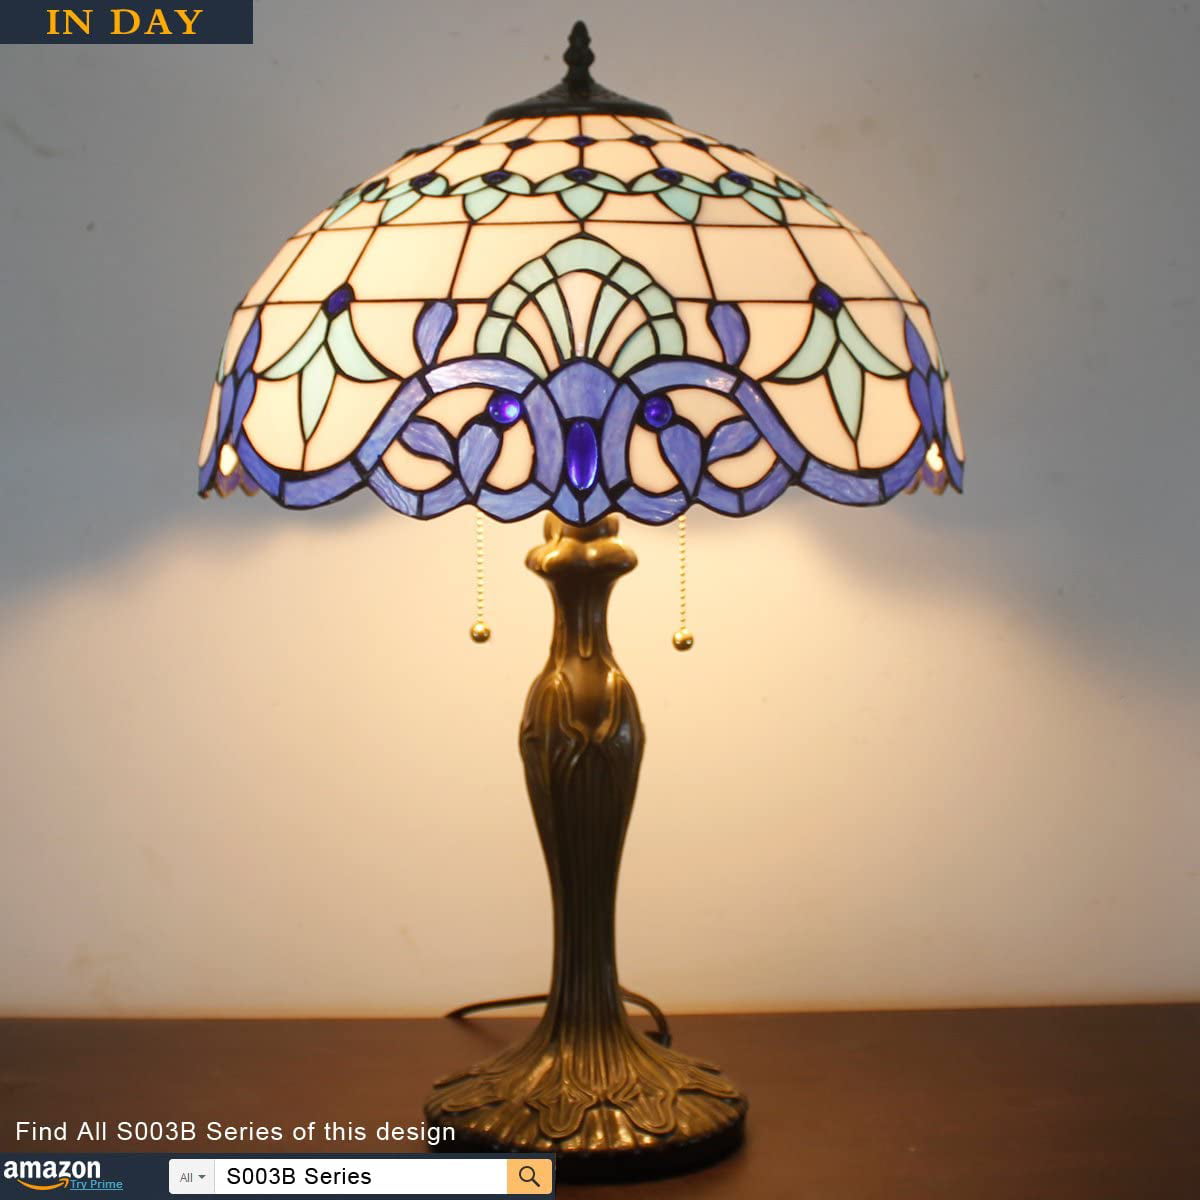  Lamp Blue Navy White Stained Glass Baroque Bedside Table Lamp Style Desk Light Metal Base 16X16X24 Inches Decor Bedroom Living Room Home Office S003B Series